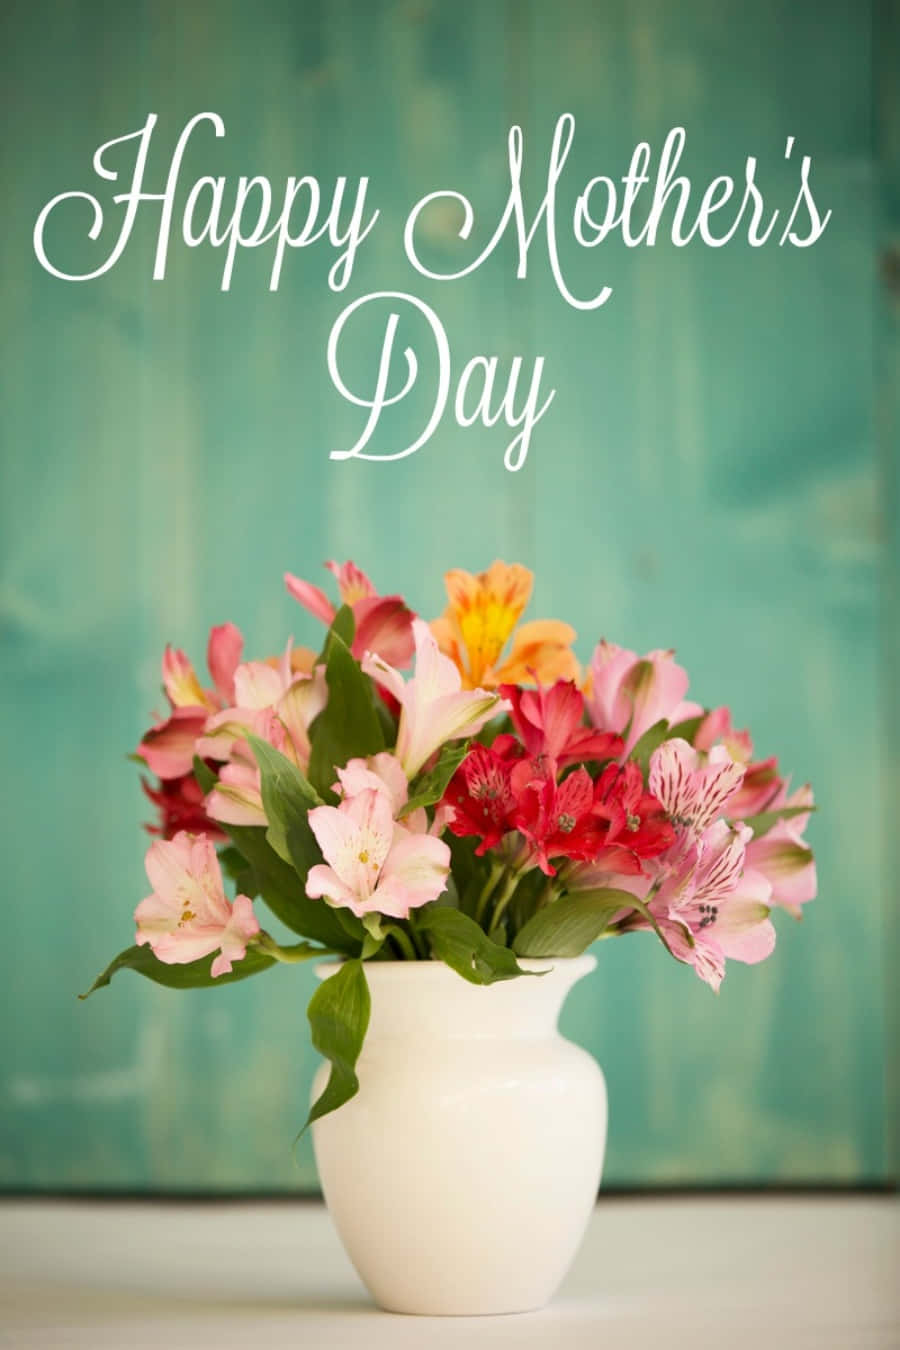 "Happy Mothers Day to all the amazing moms out there!"